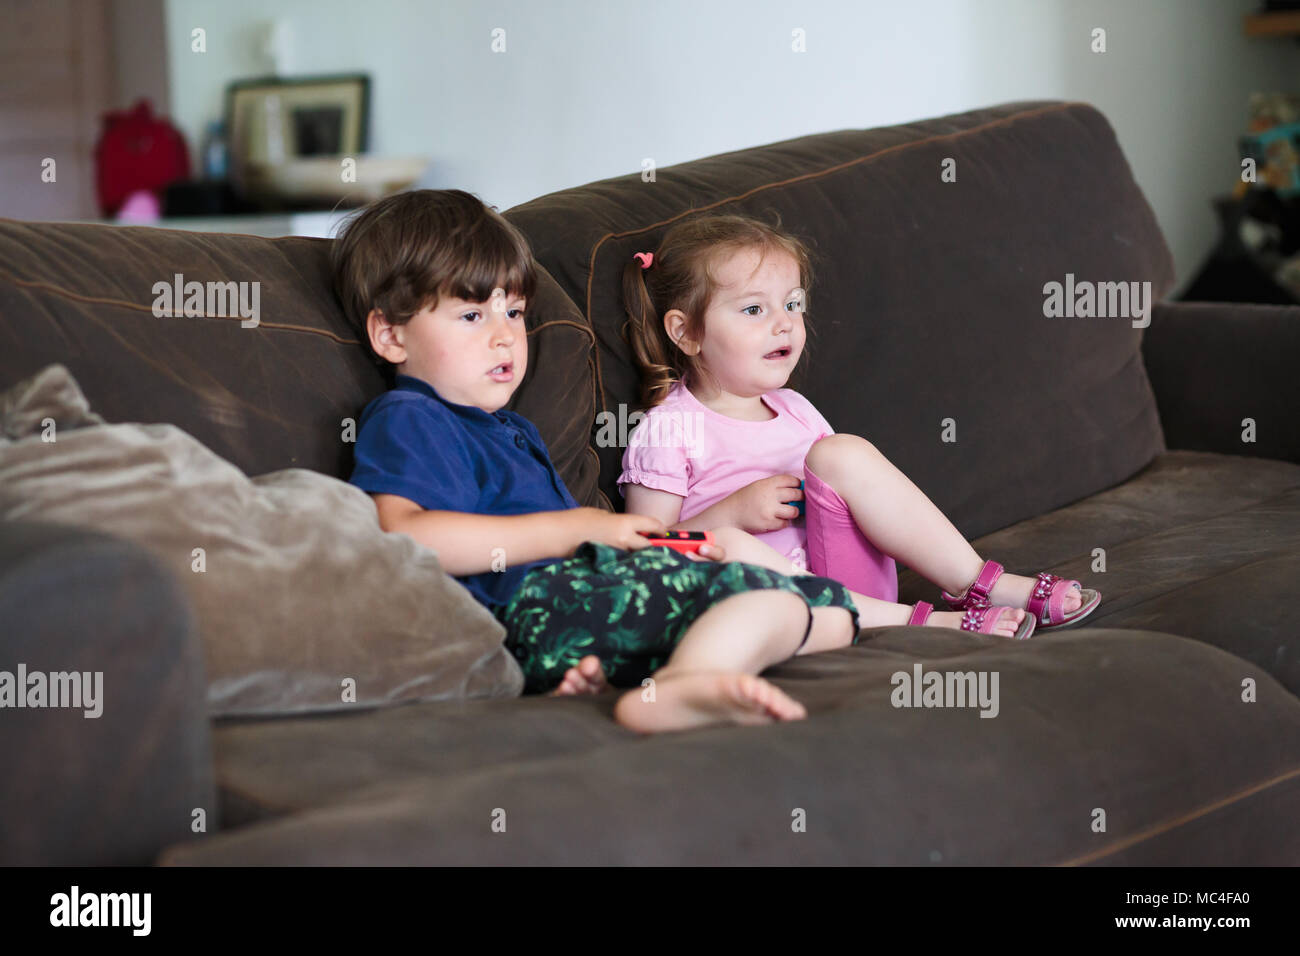 Kids boy and girl playing video game sitting on sofa at home. Children playing together Stock Photo